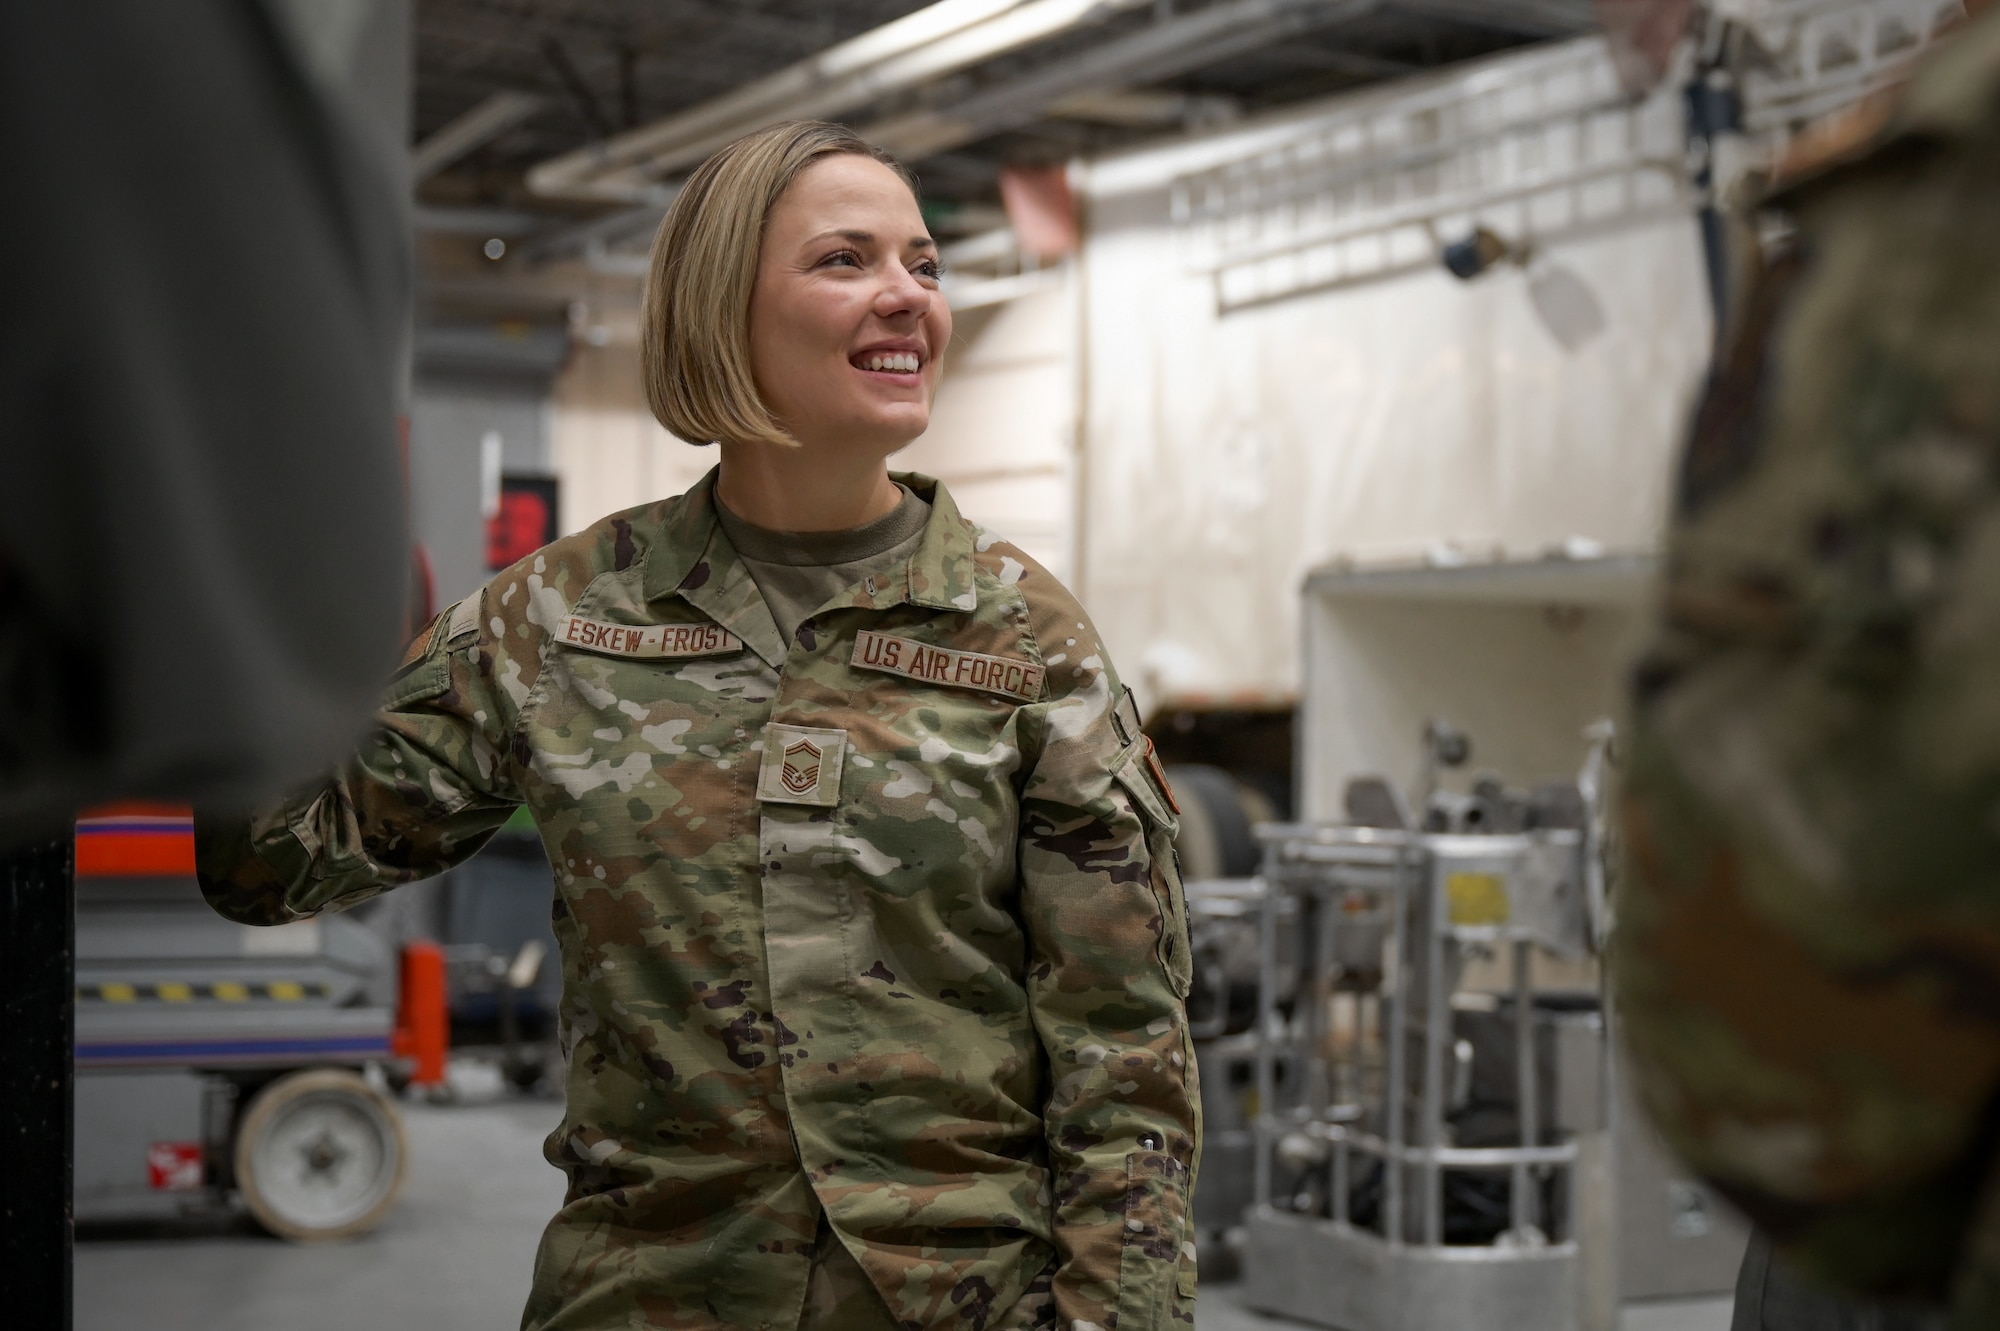 A woman in military uniform and short blonde hair smiles to her right as she speaks with a person out of frame.